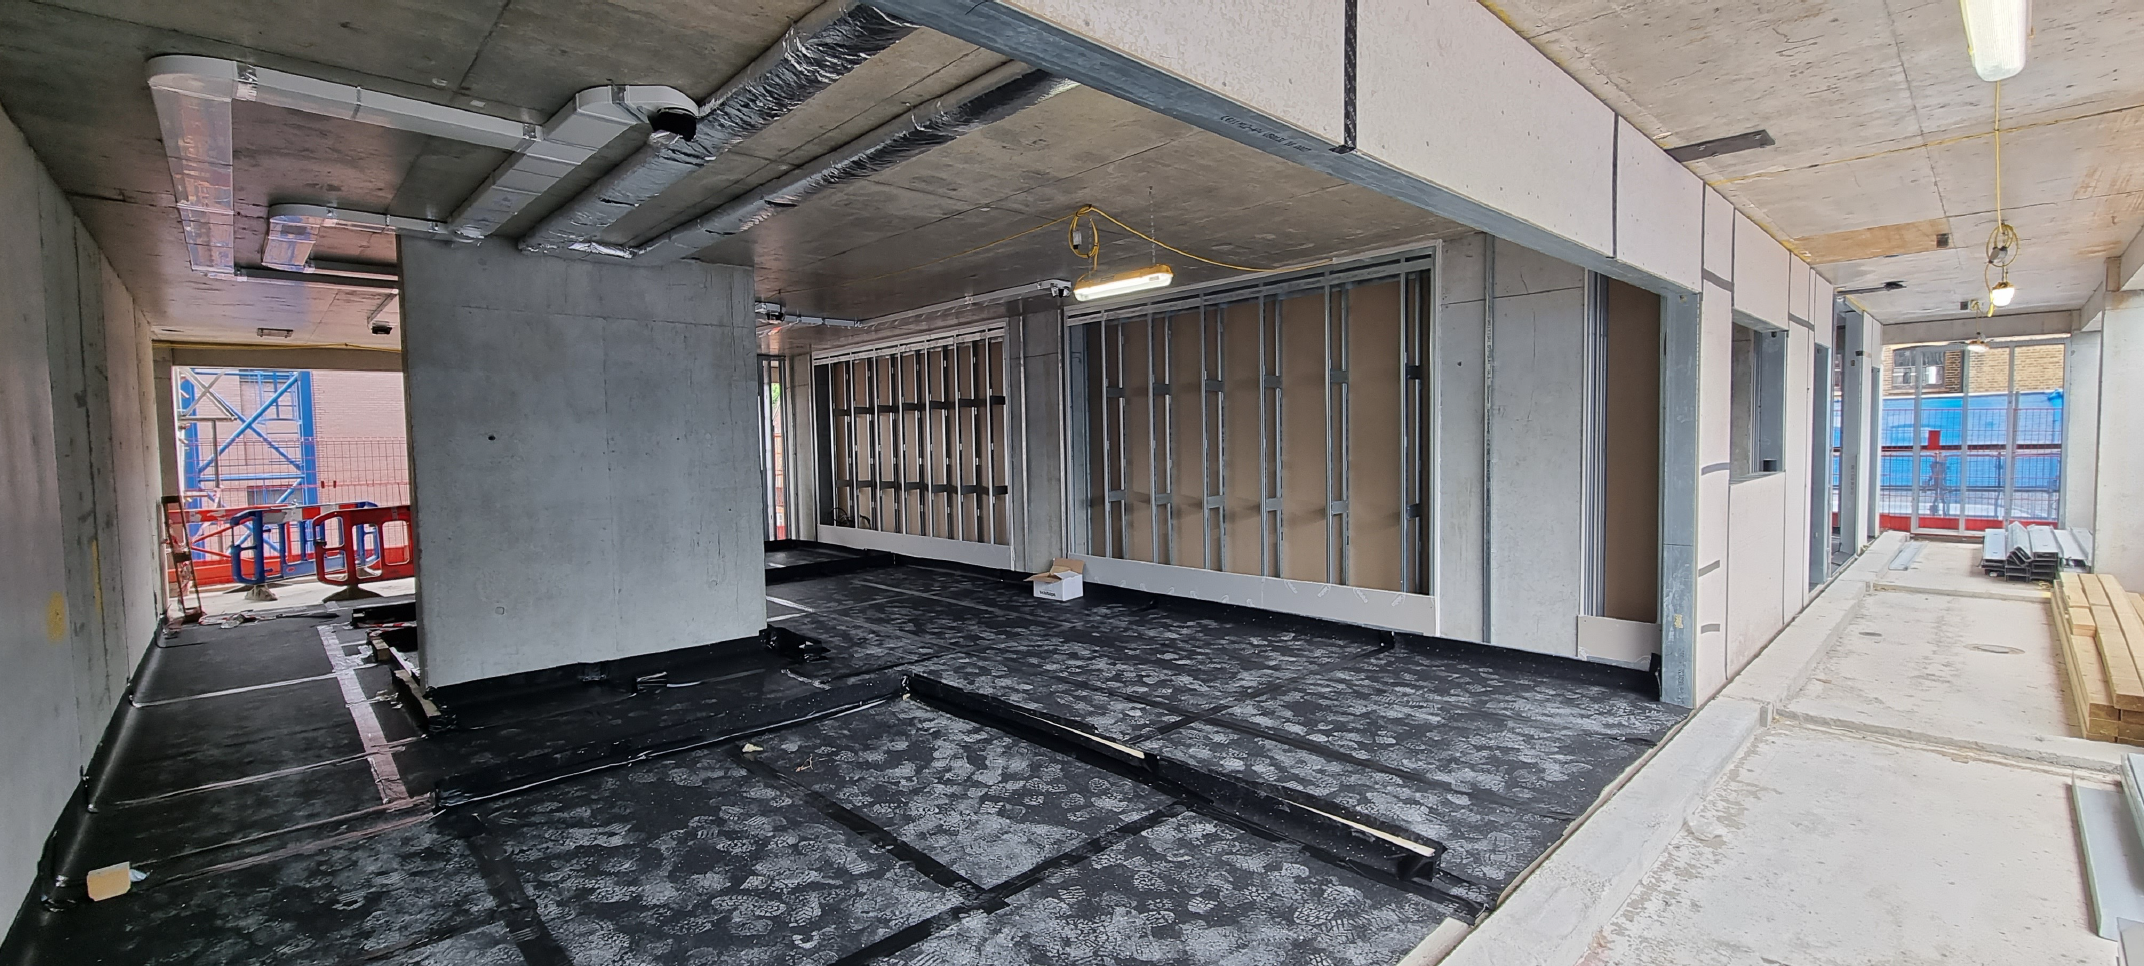 External and party walls, as well as ductwork and preparation for screeding